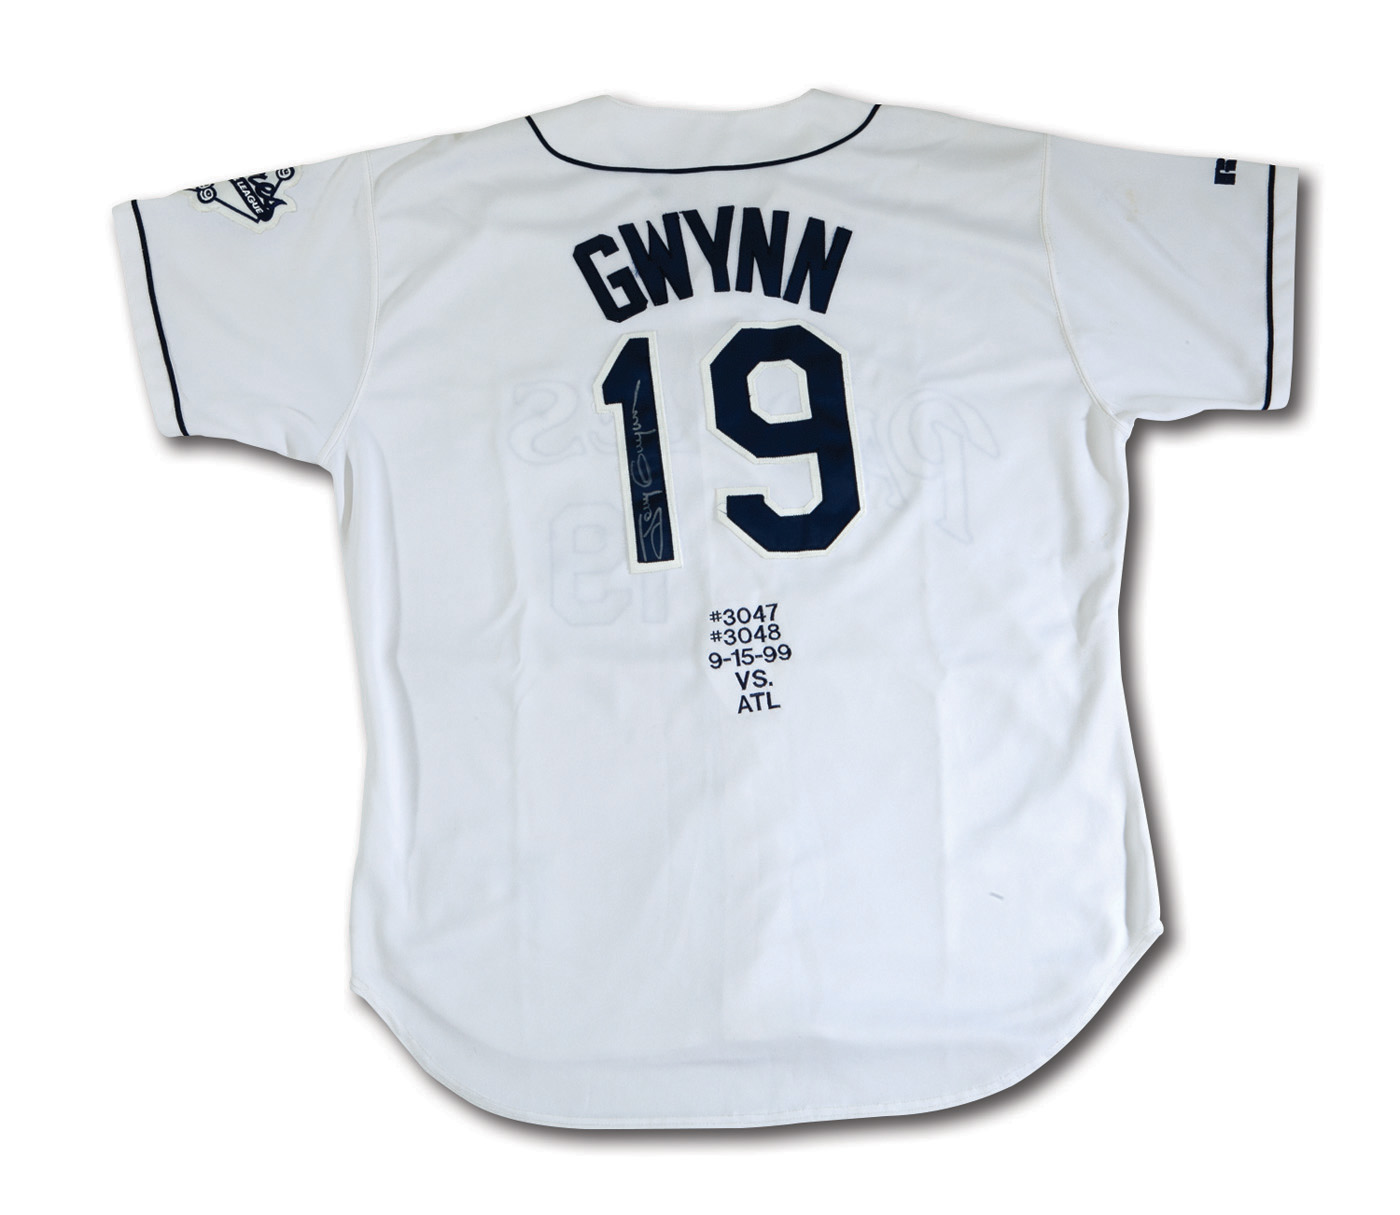 Lot Detail - 9/15/1999 TONY GWYNN AUTOGRAPHED SAN DIEGO PADRES GAME WORN  ROAD JERSEY WORN FOR CAREER HITS 3,047 & 3,048 (GWYNN FAMILY LOA)